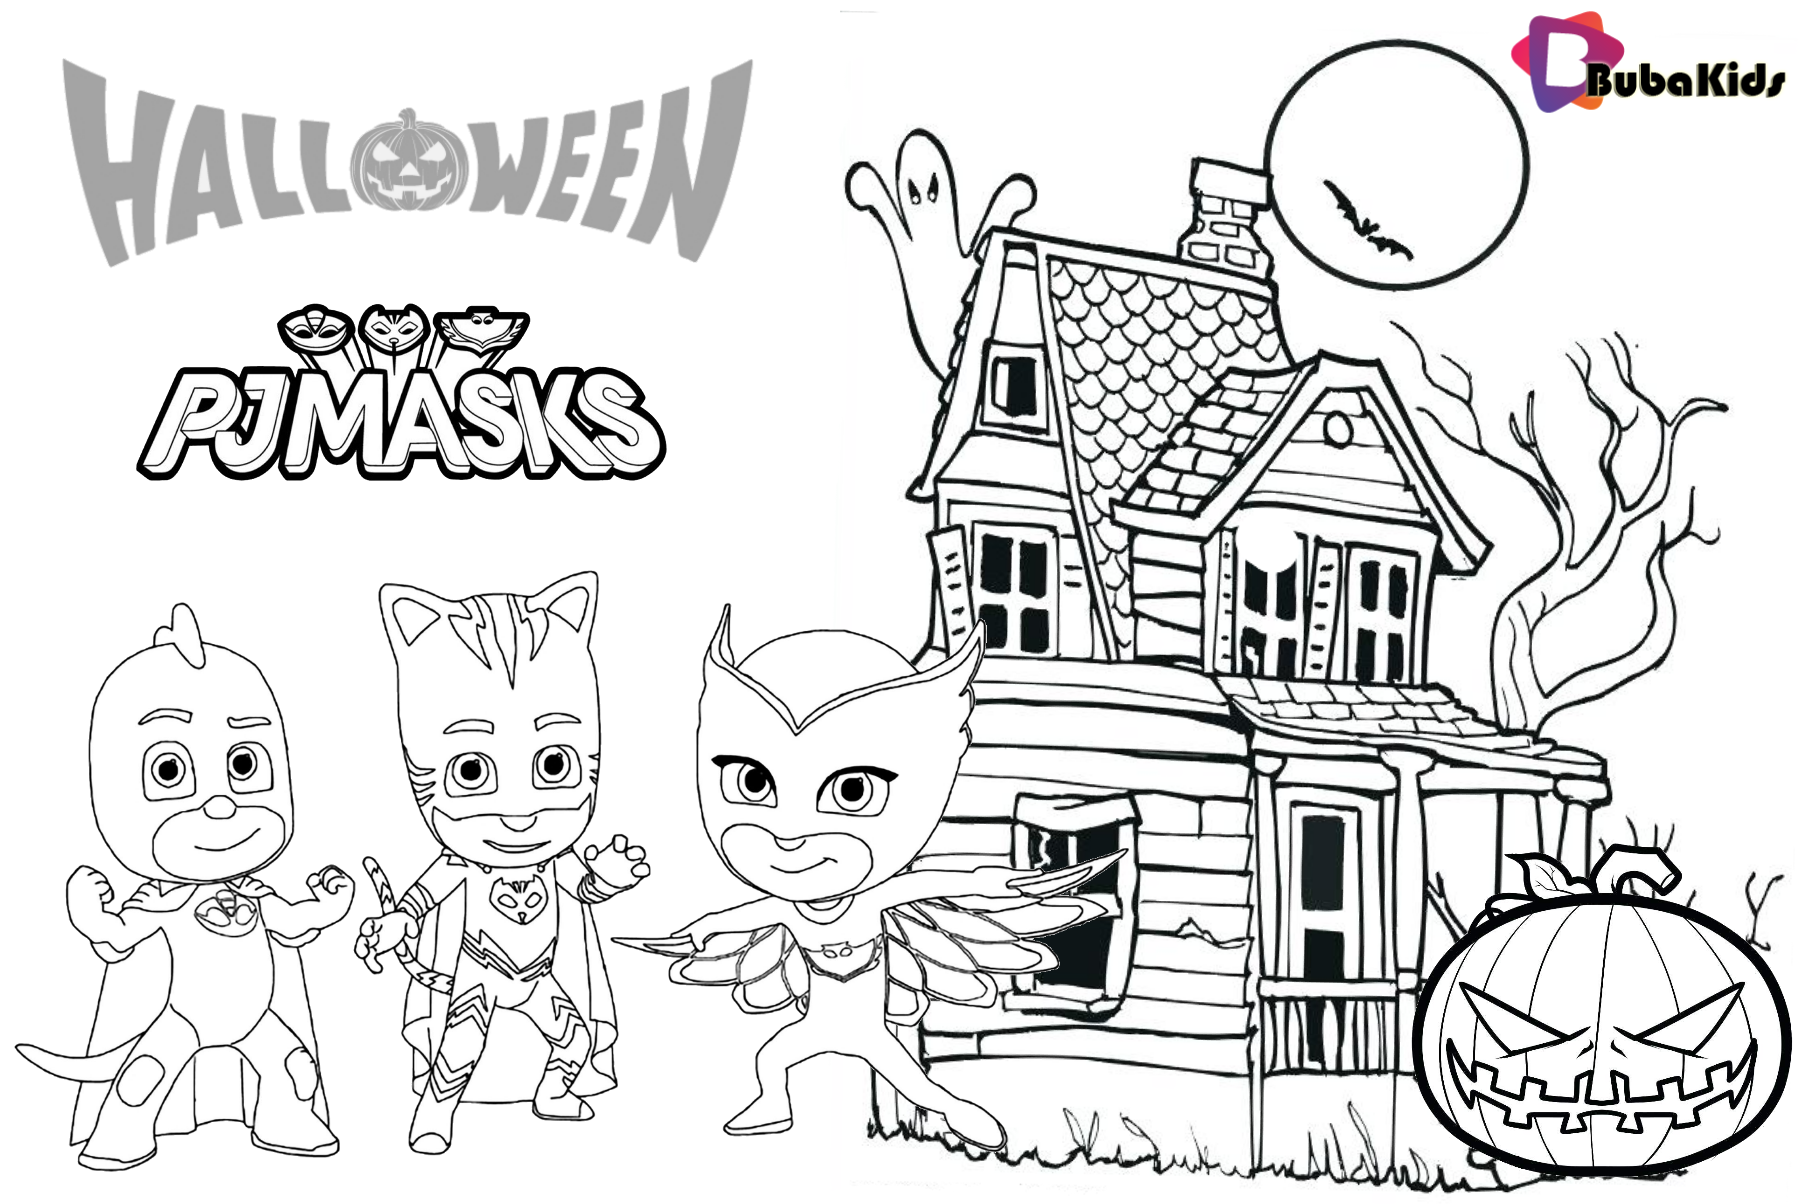 PJ Masks costume for Halloween coloring page and printable Wallpaper